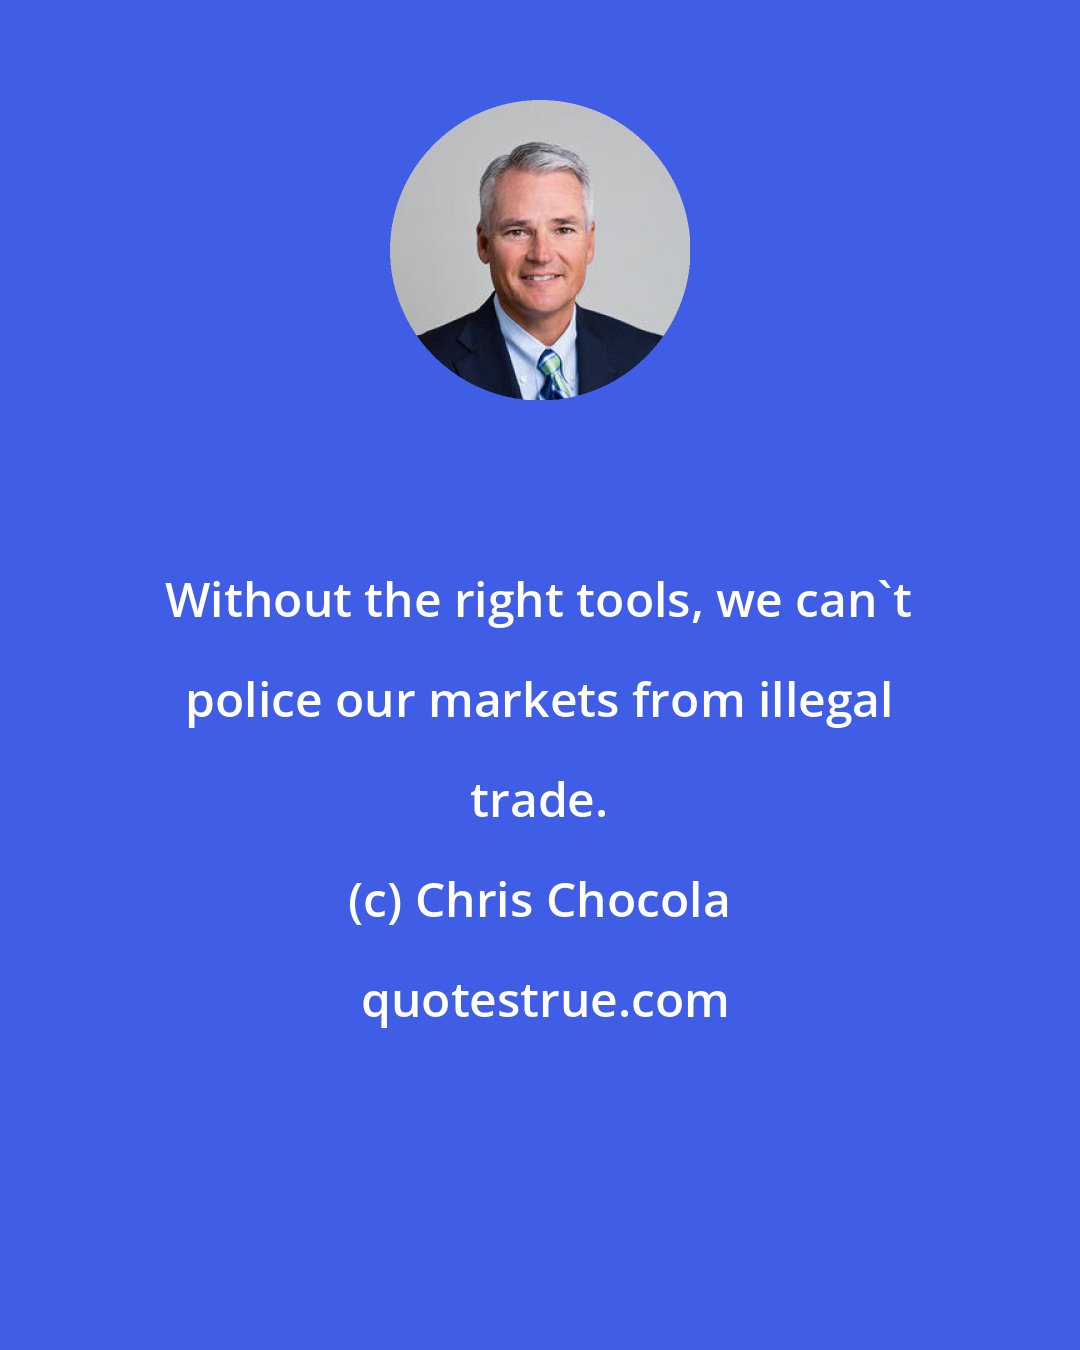 Chris Chocola: Without the right tools, we can't police our markets from illegal trade.